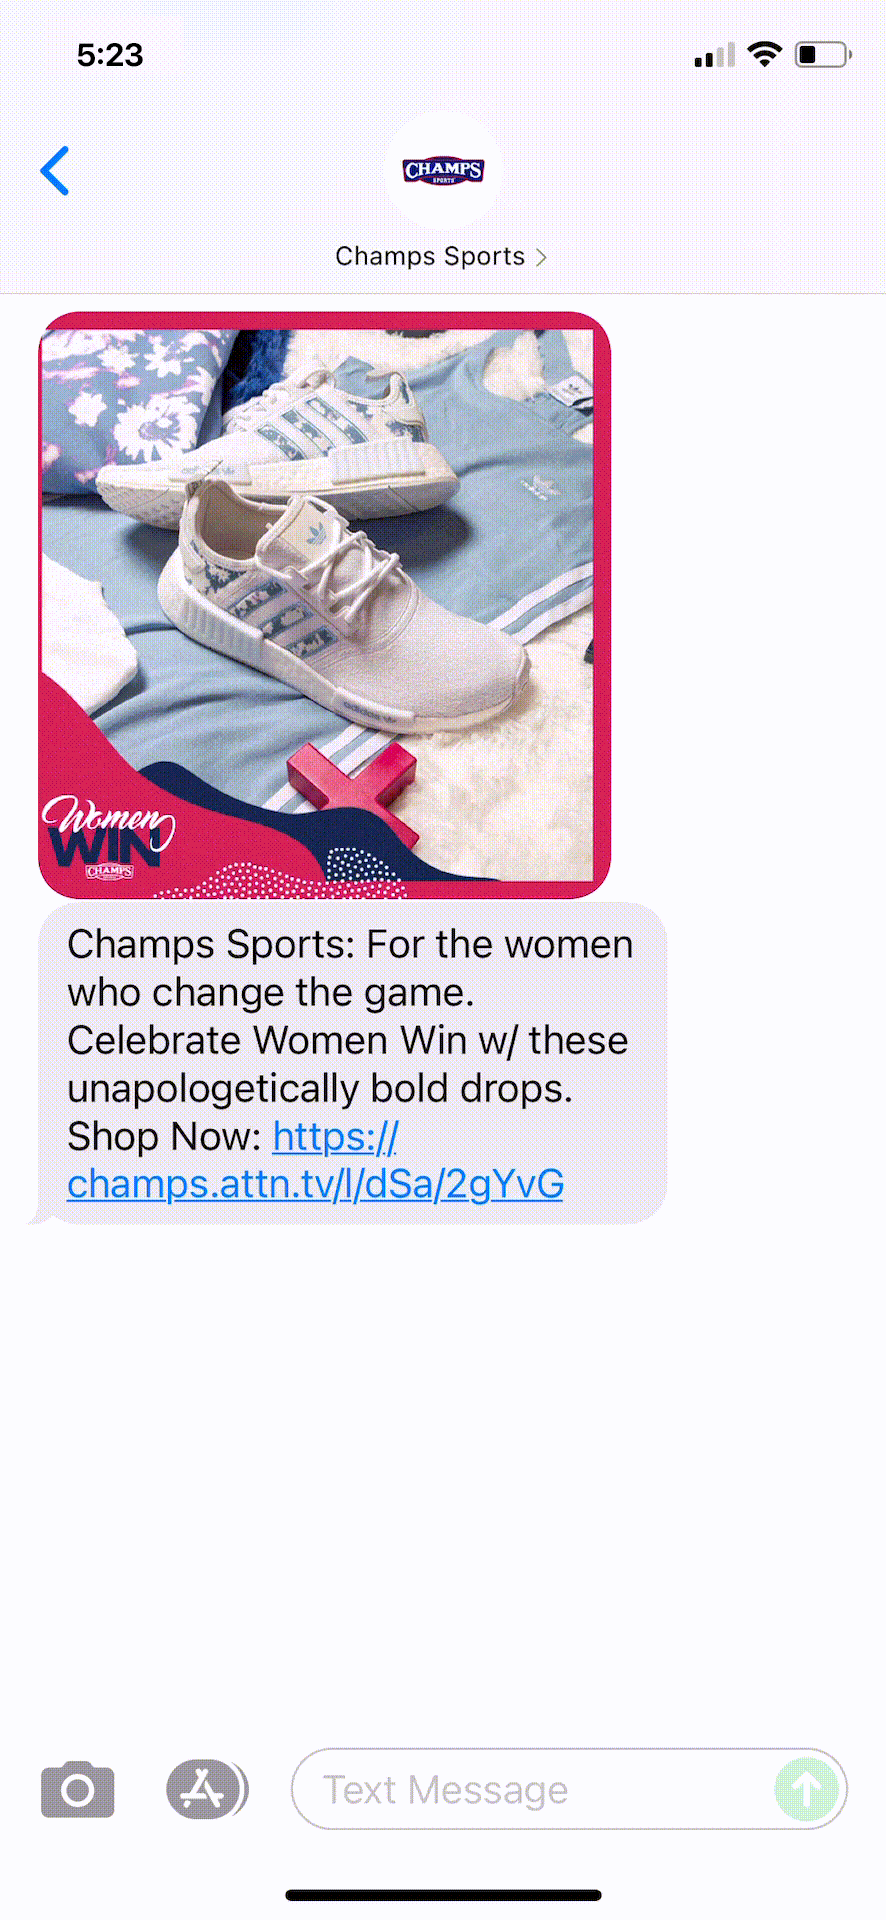 Champs-Sports-Text-Message-Marketing-Example-07.25.2021